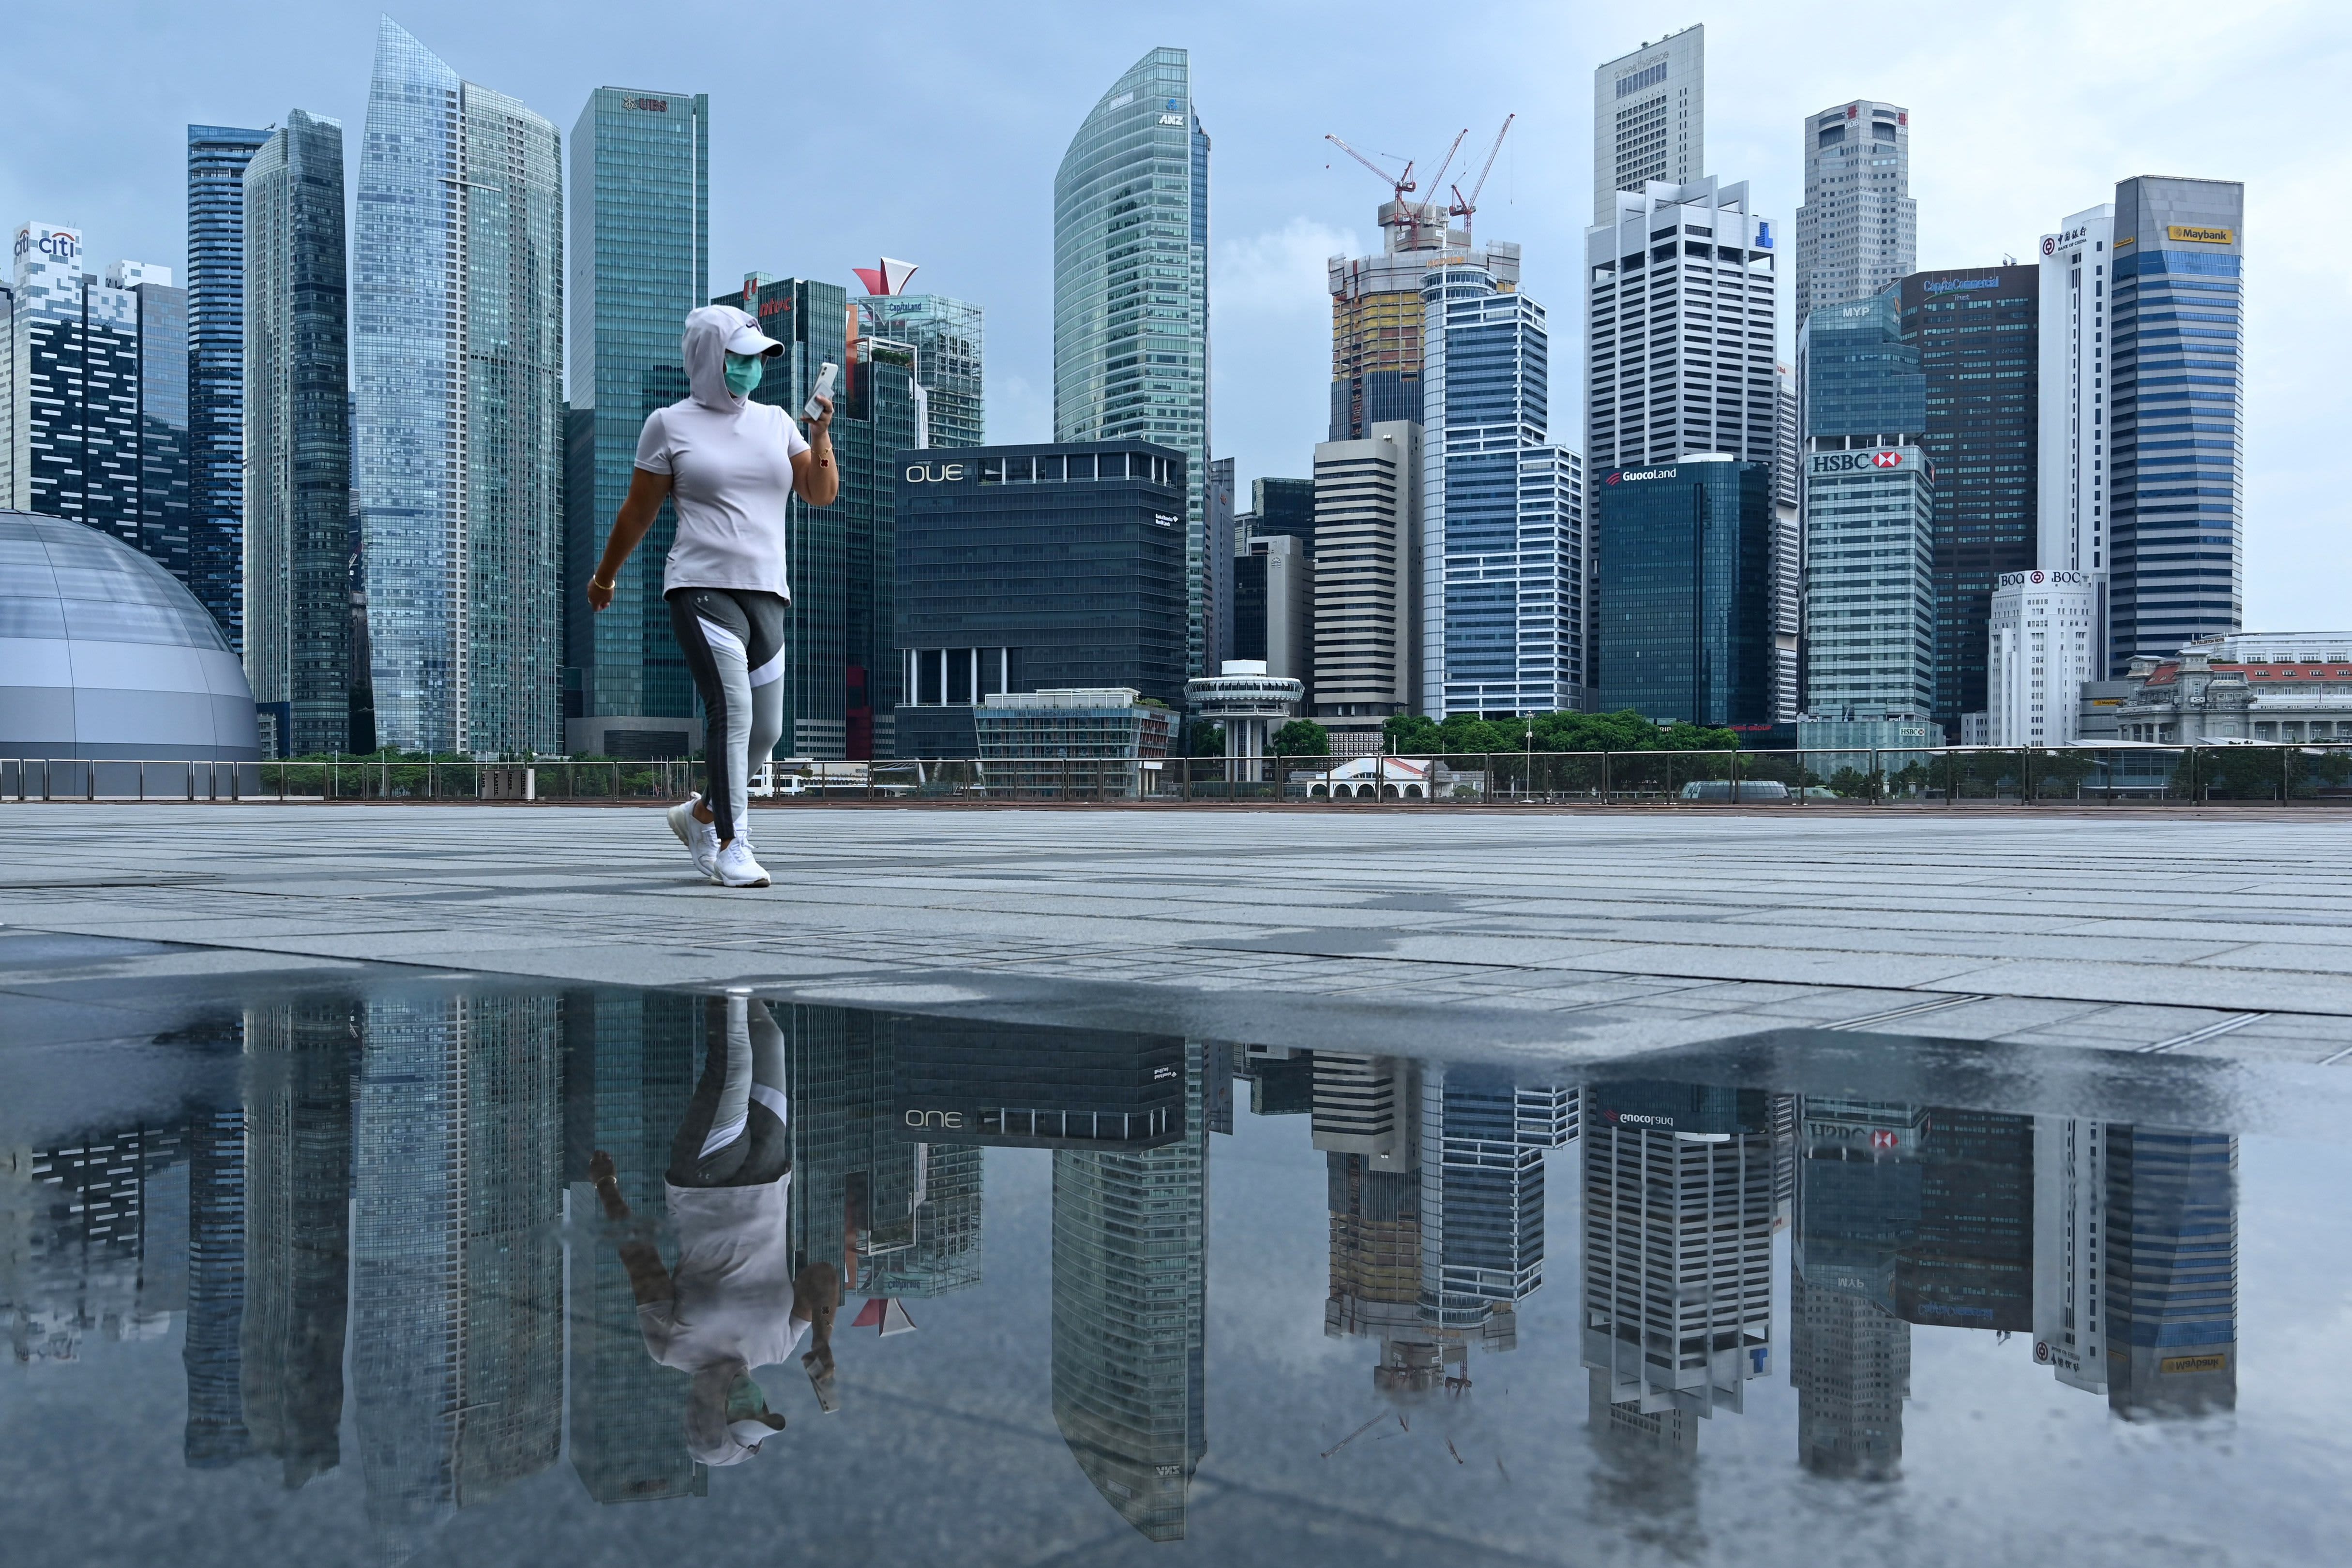 Singapore is launching fourth-quarter GDP estimates for 2020